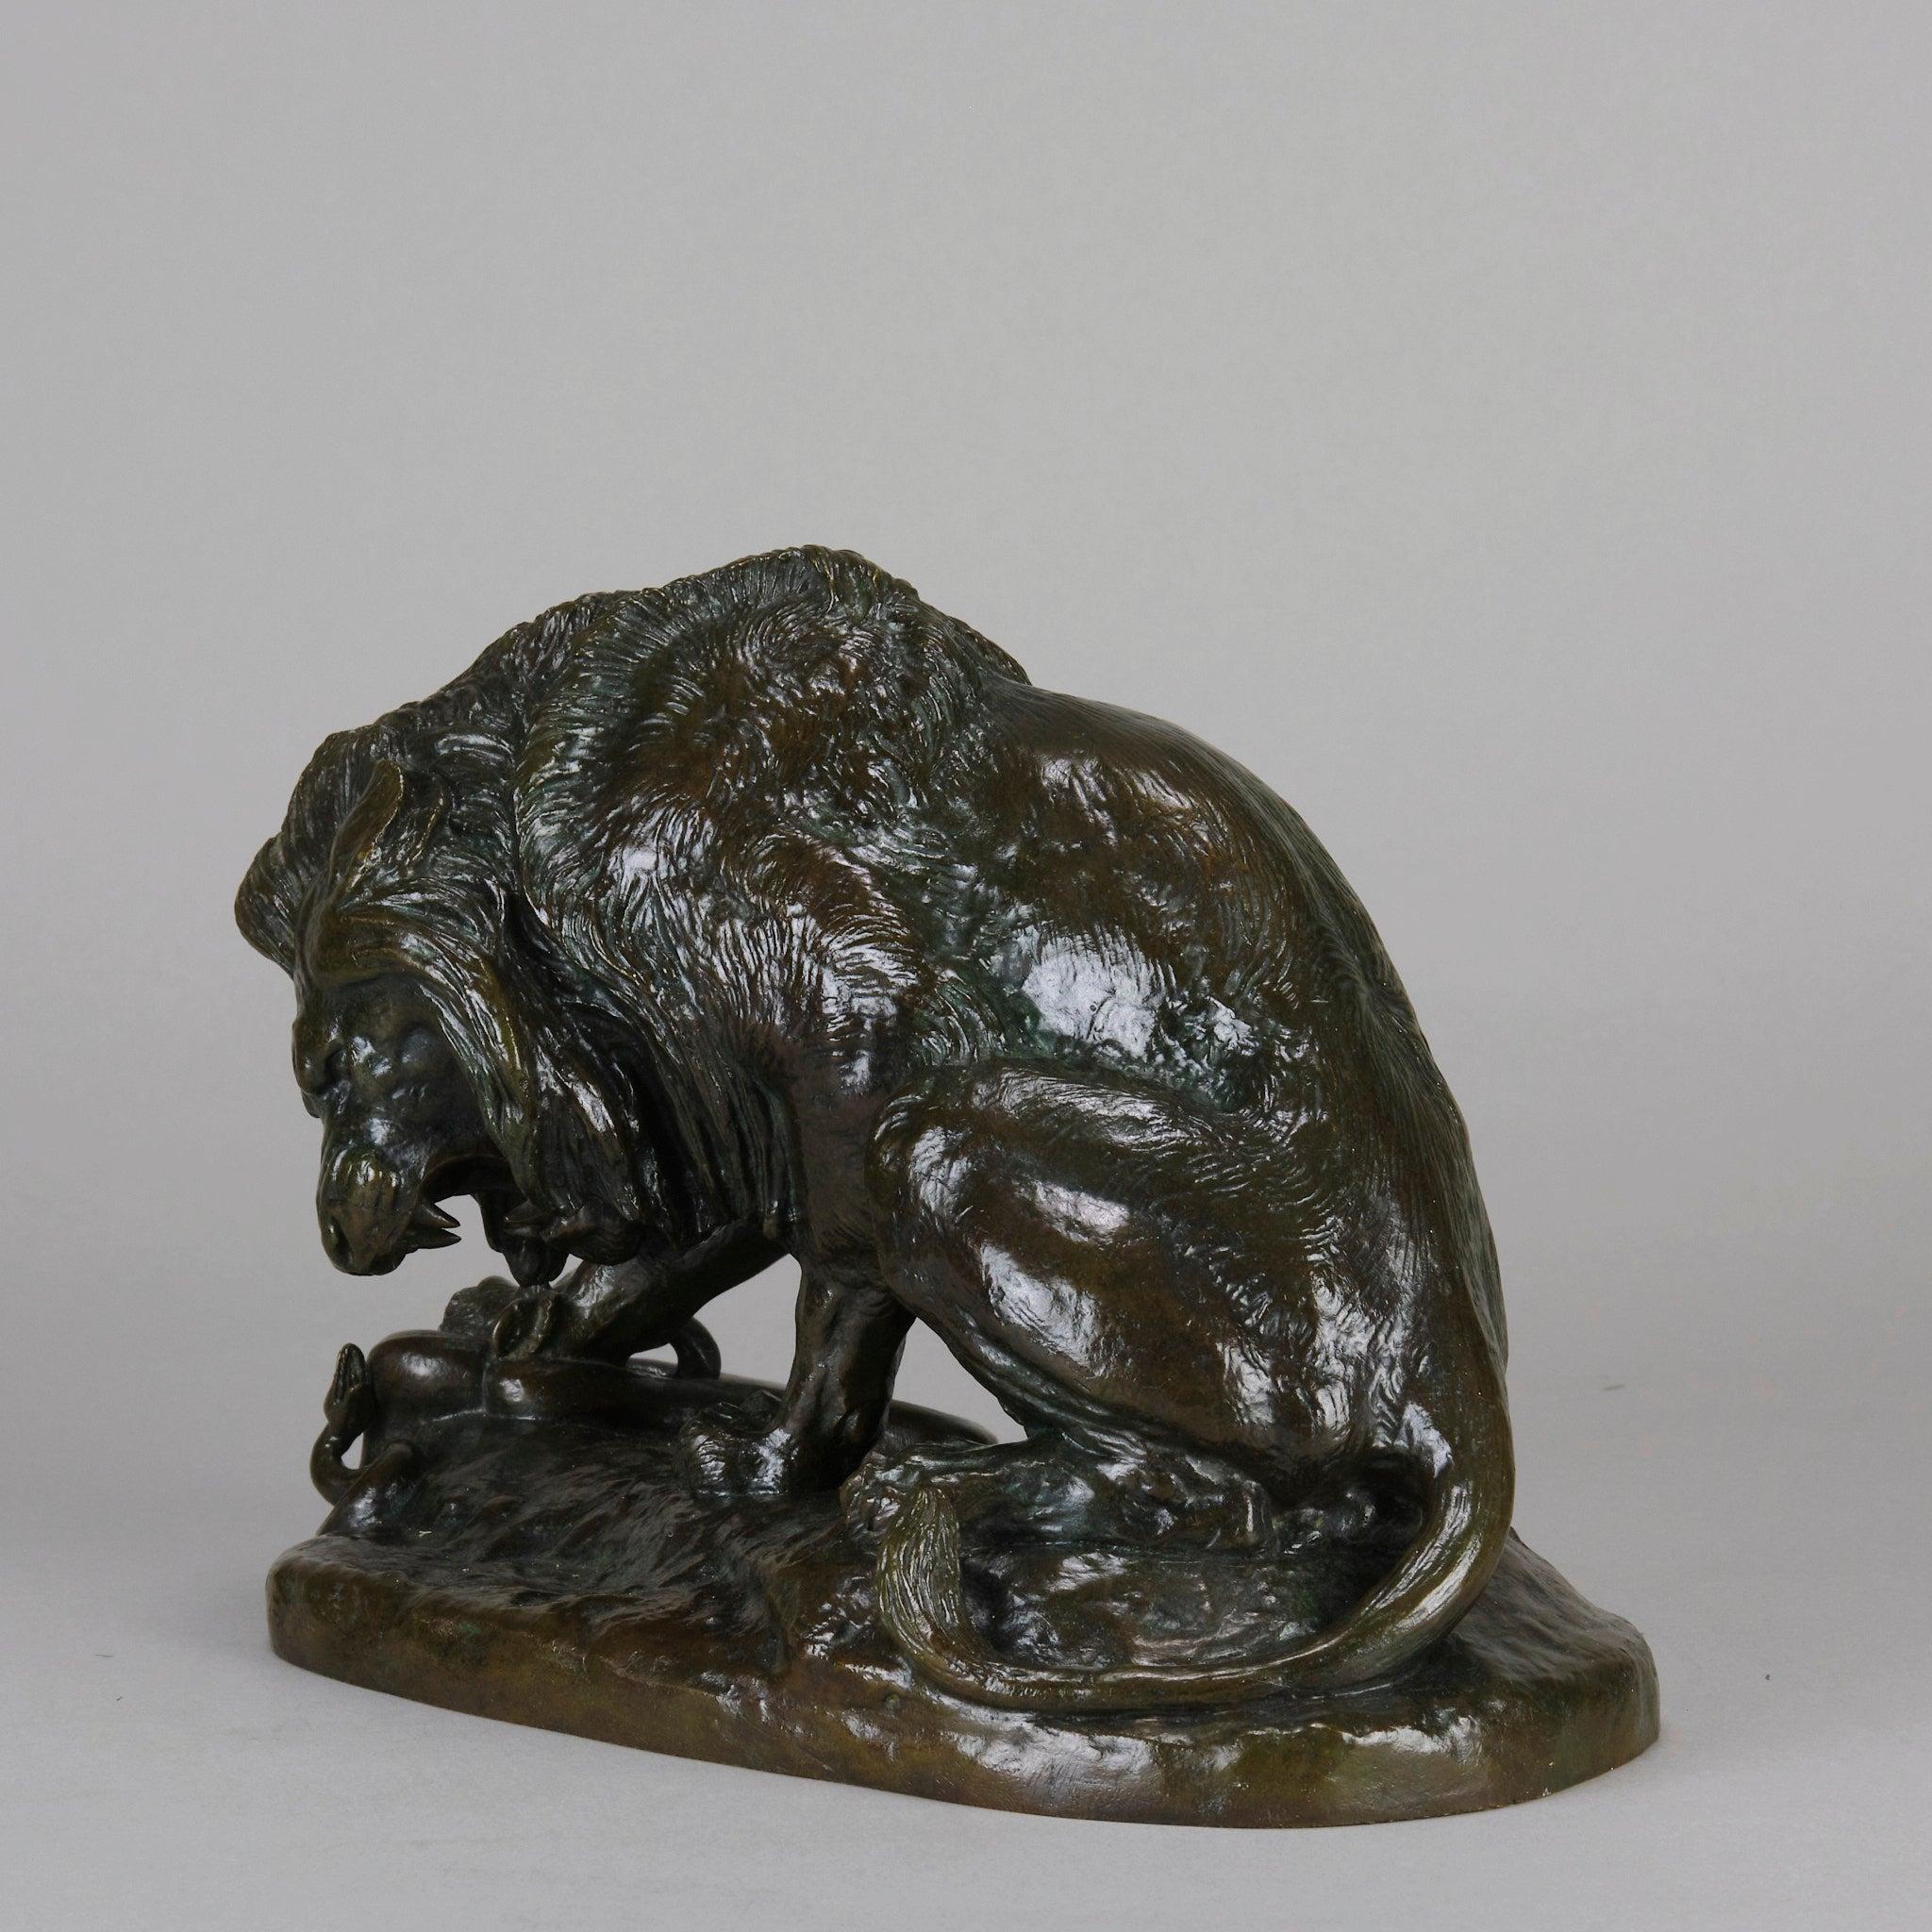 A powerful and impressive French Animaliers bronze study of a Lion holding down a snake beneath his paw, with excellent hand chased surface detail and rich brown and green patination in variegated shades to the raised areas, signed BARYE. A rare